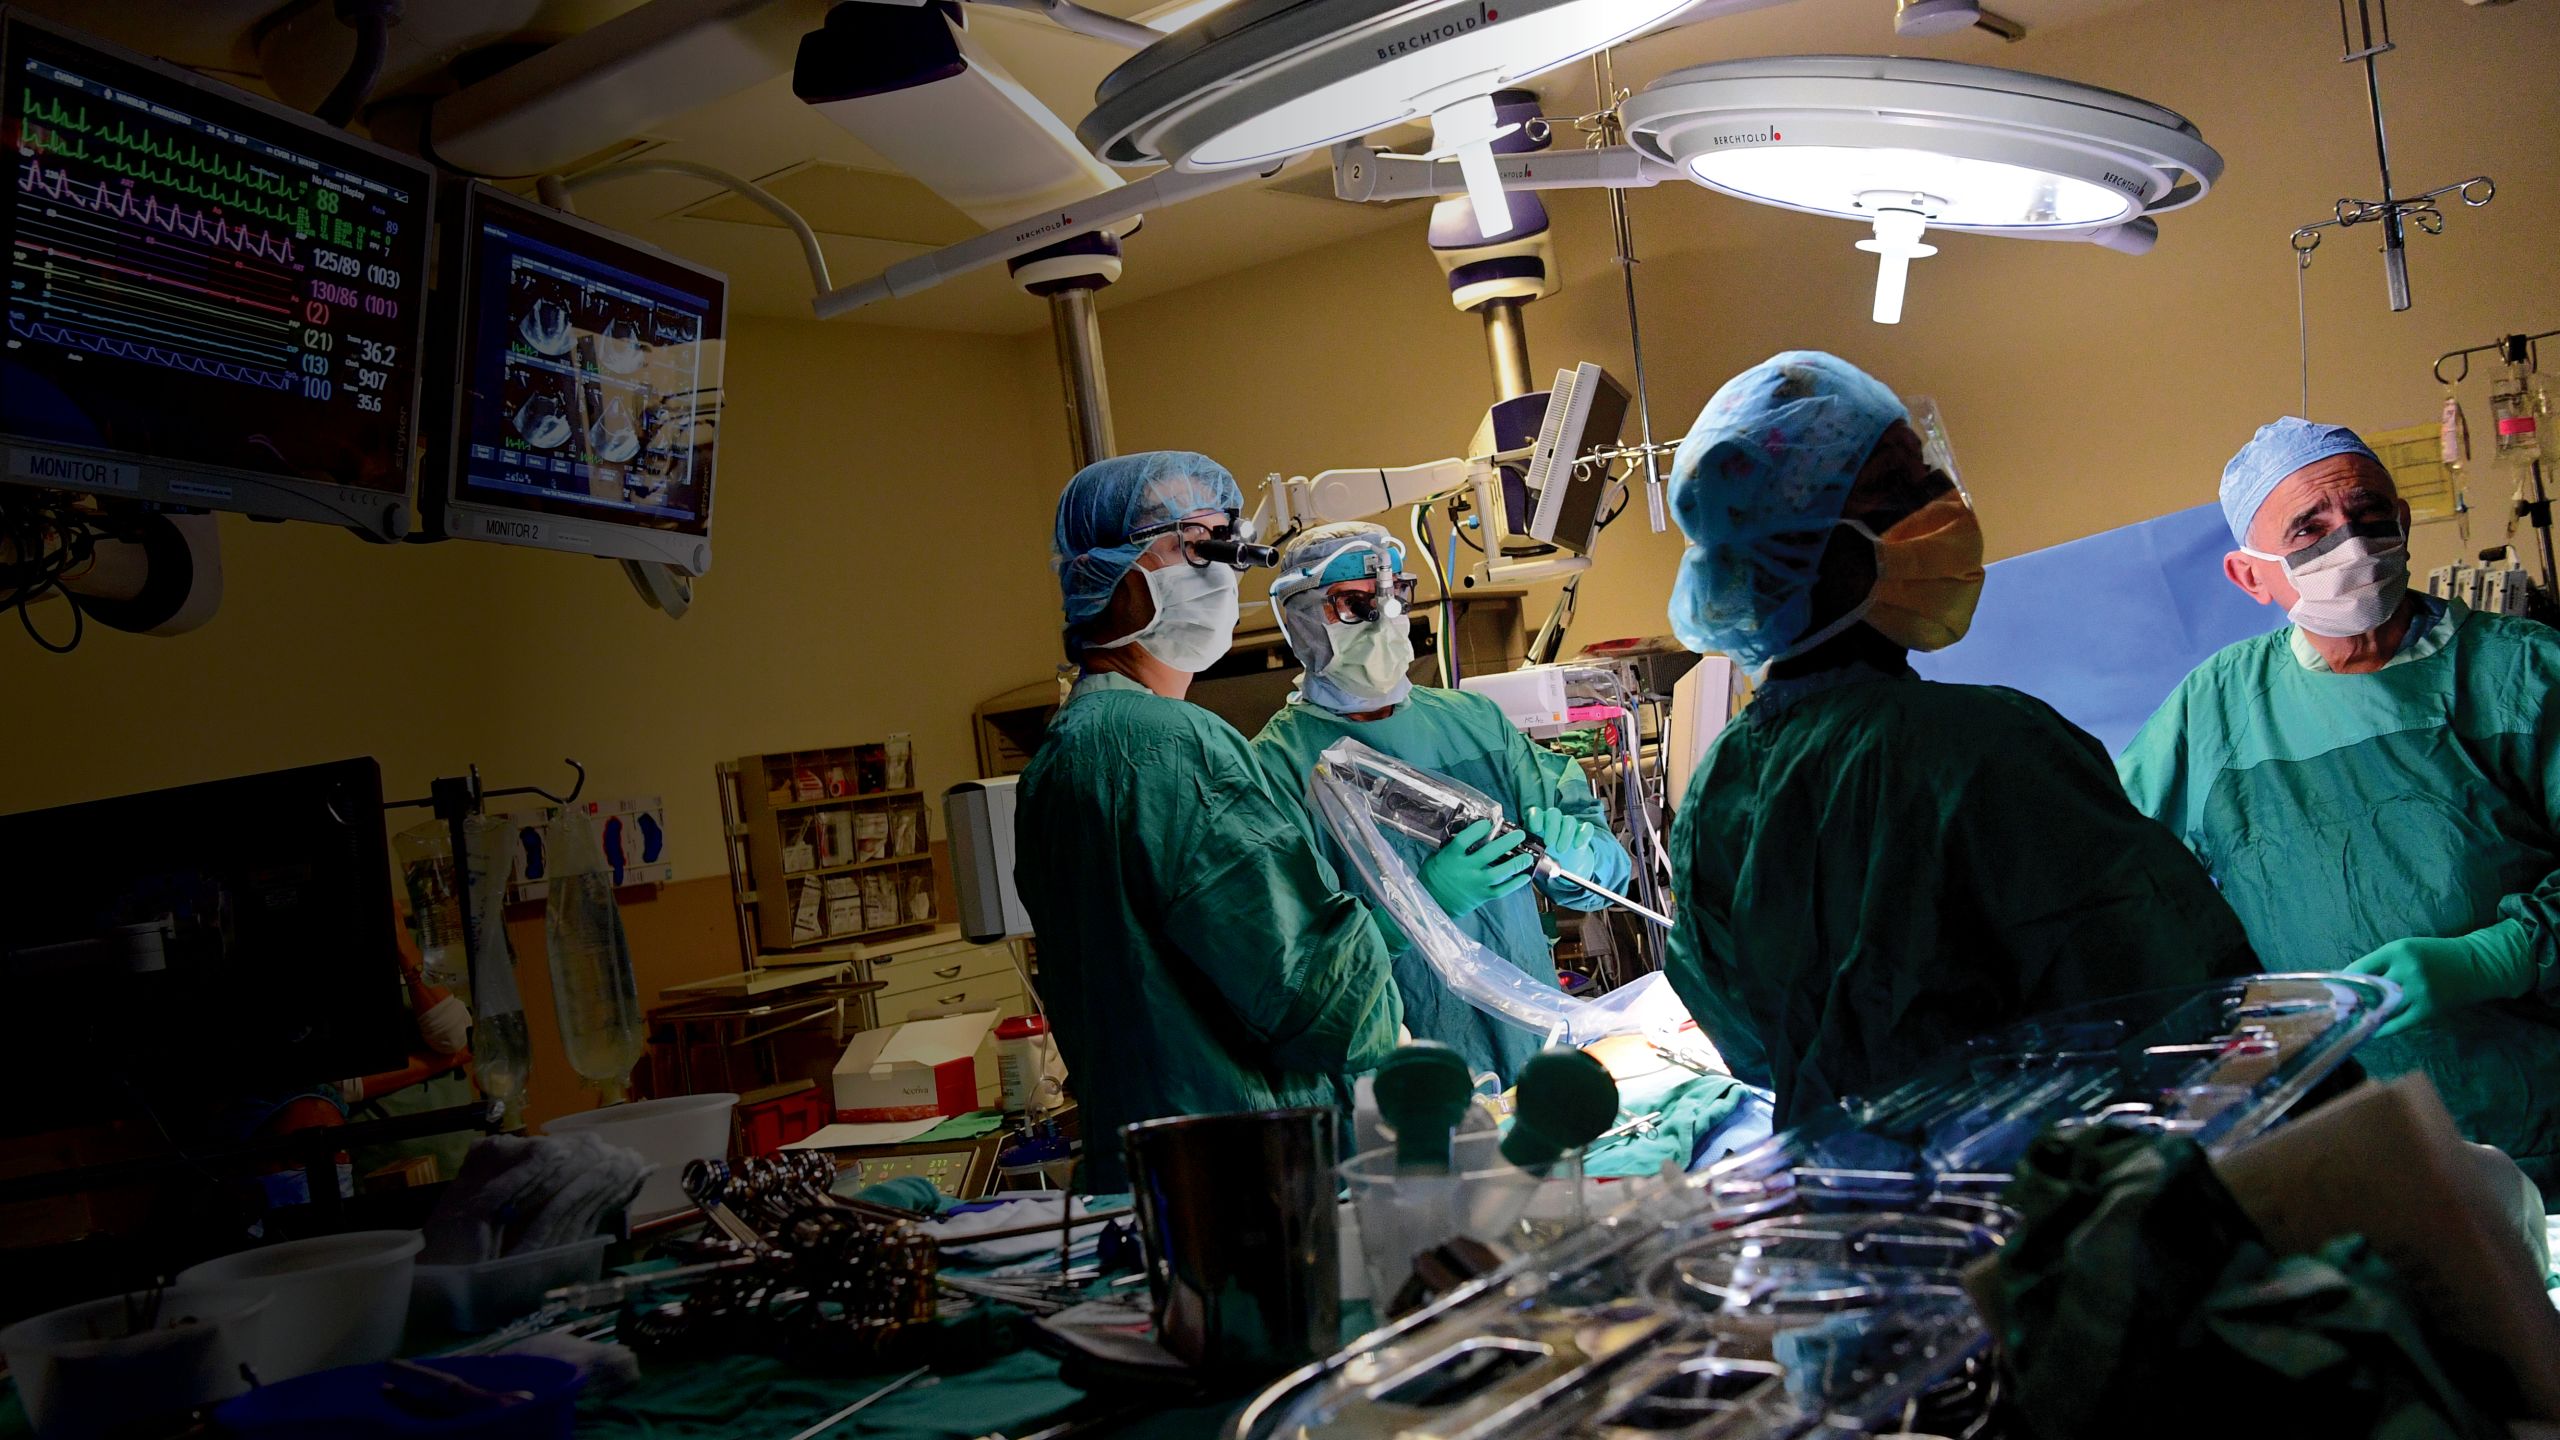 An image of Emory doctors in a surgical room performing surgery